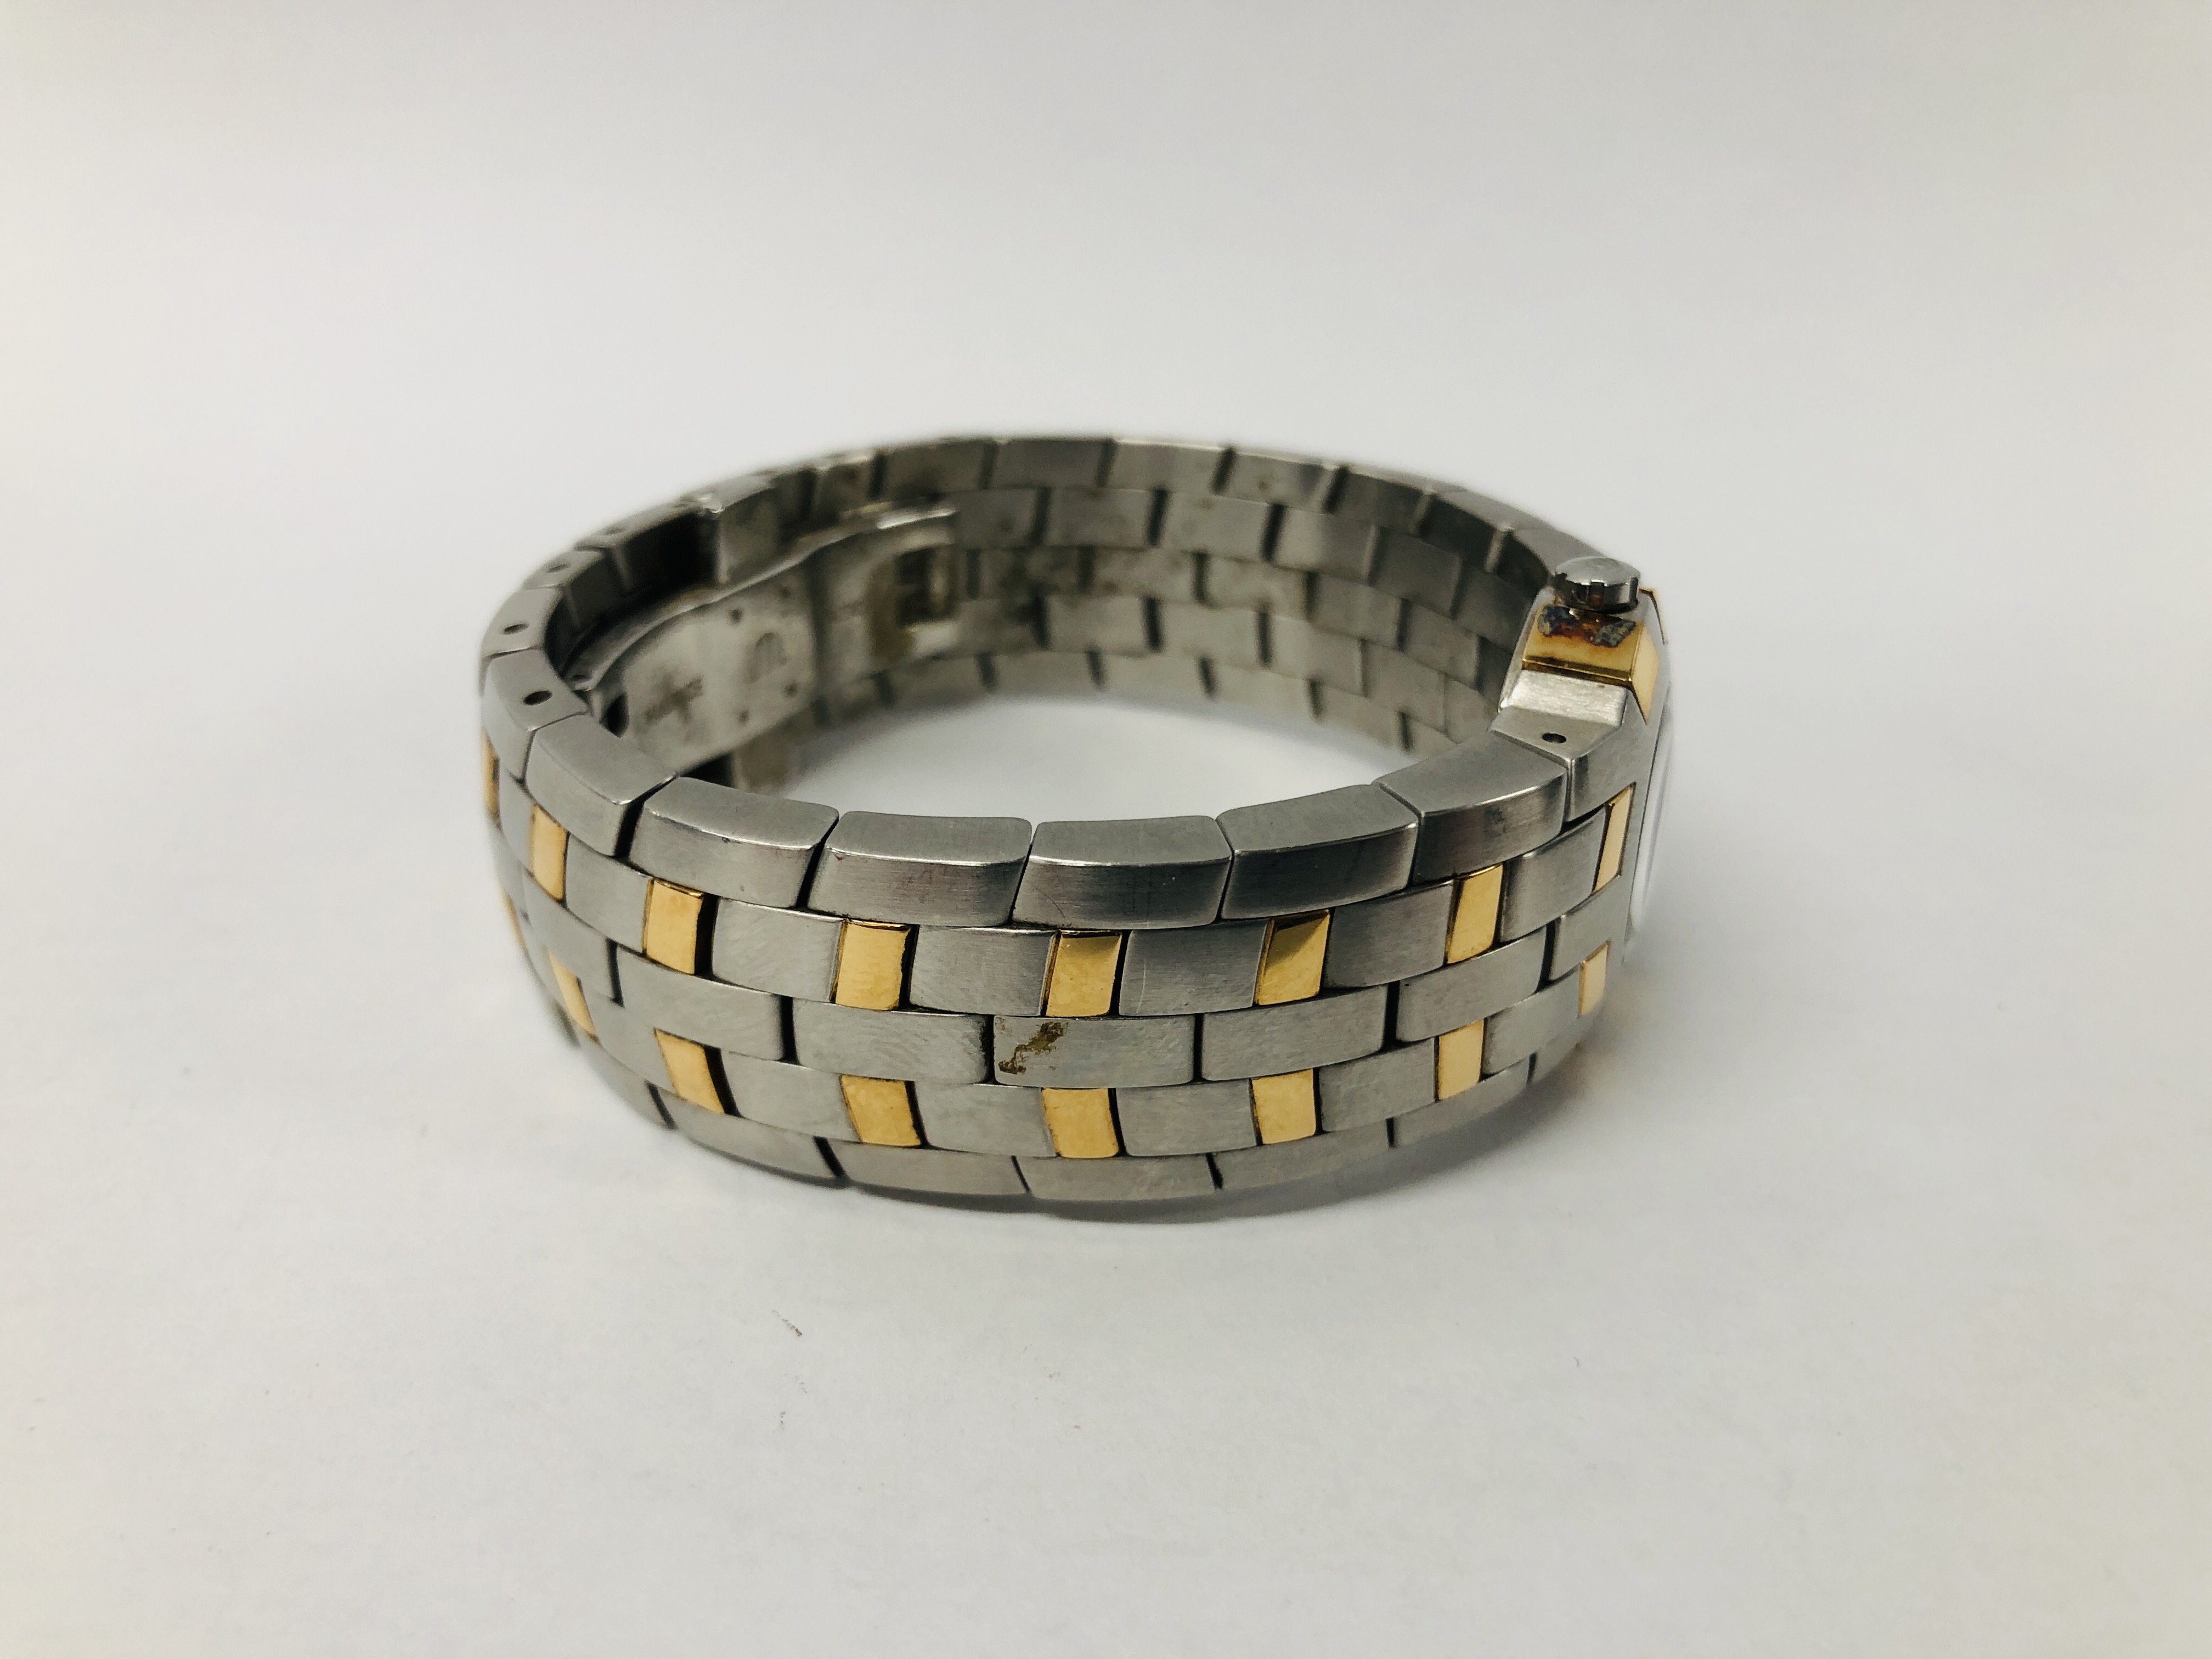 LADIES MAURICE LACROIX BRACELET WATCH THE CASE MARKED STAINLESS STEEL AND 18K 750 - Image 2 of 7